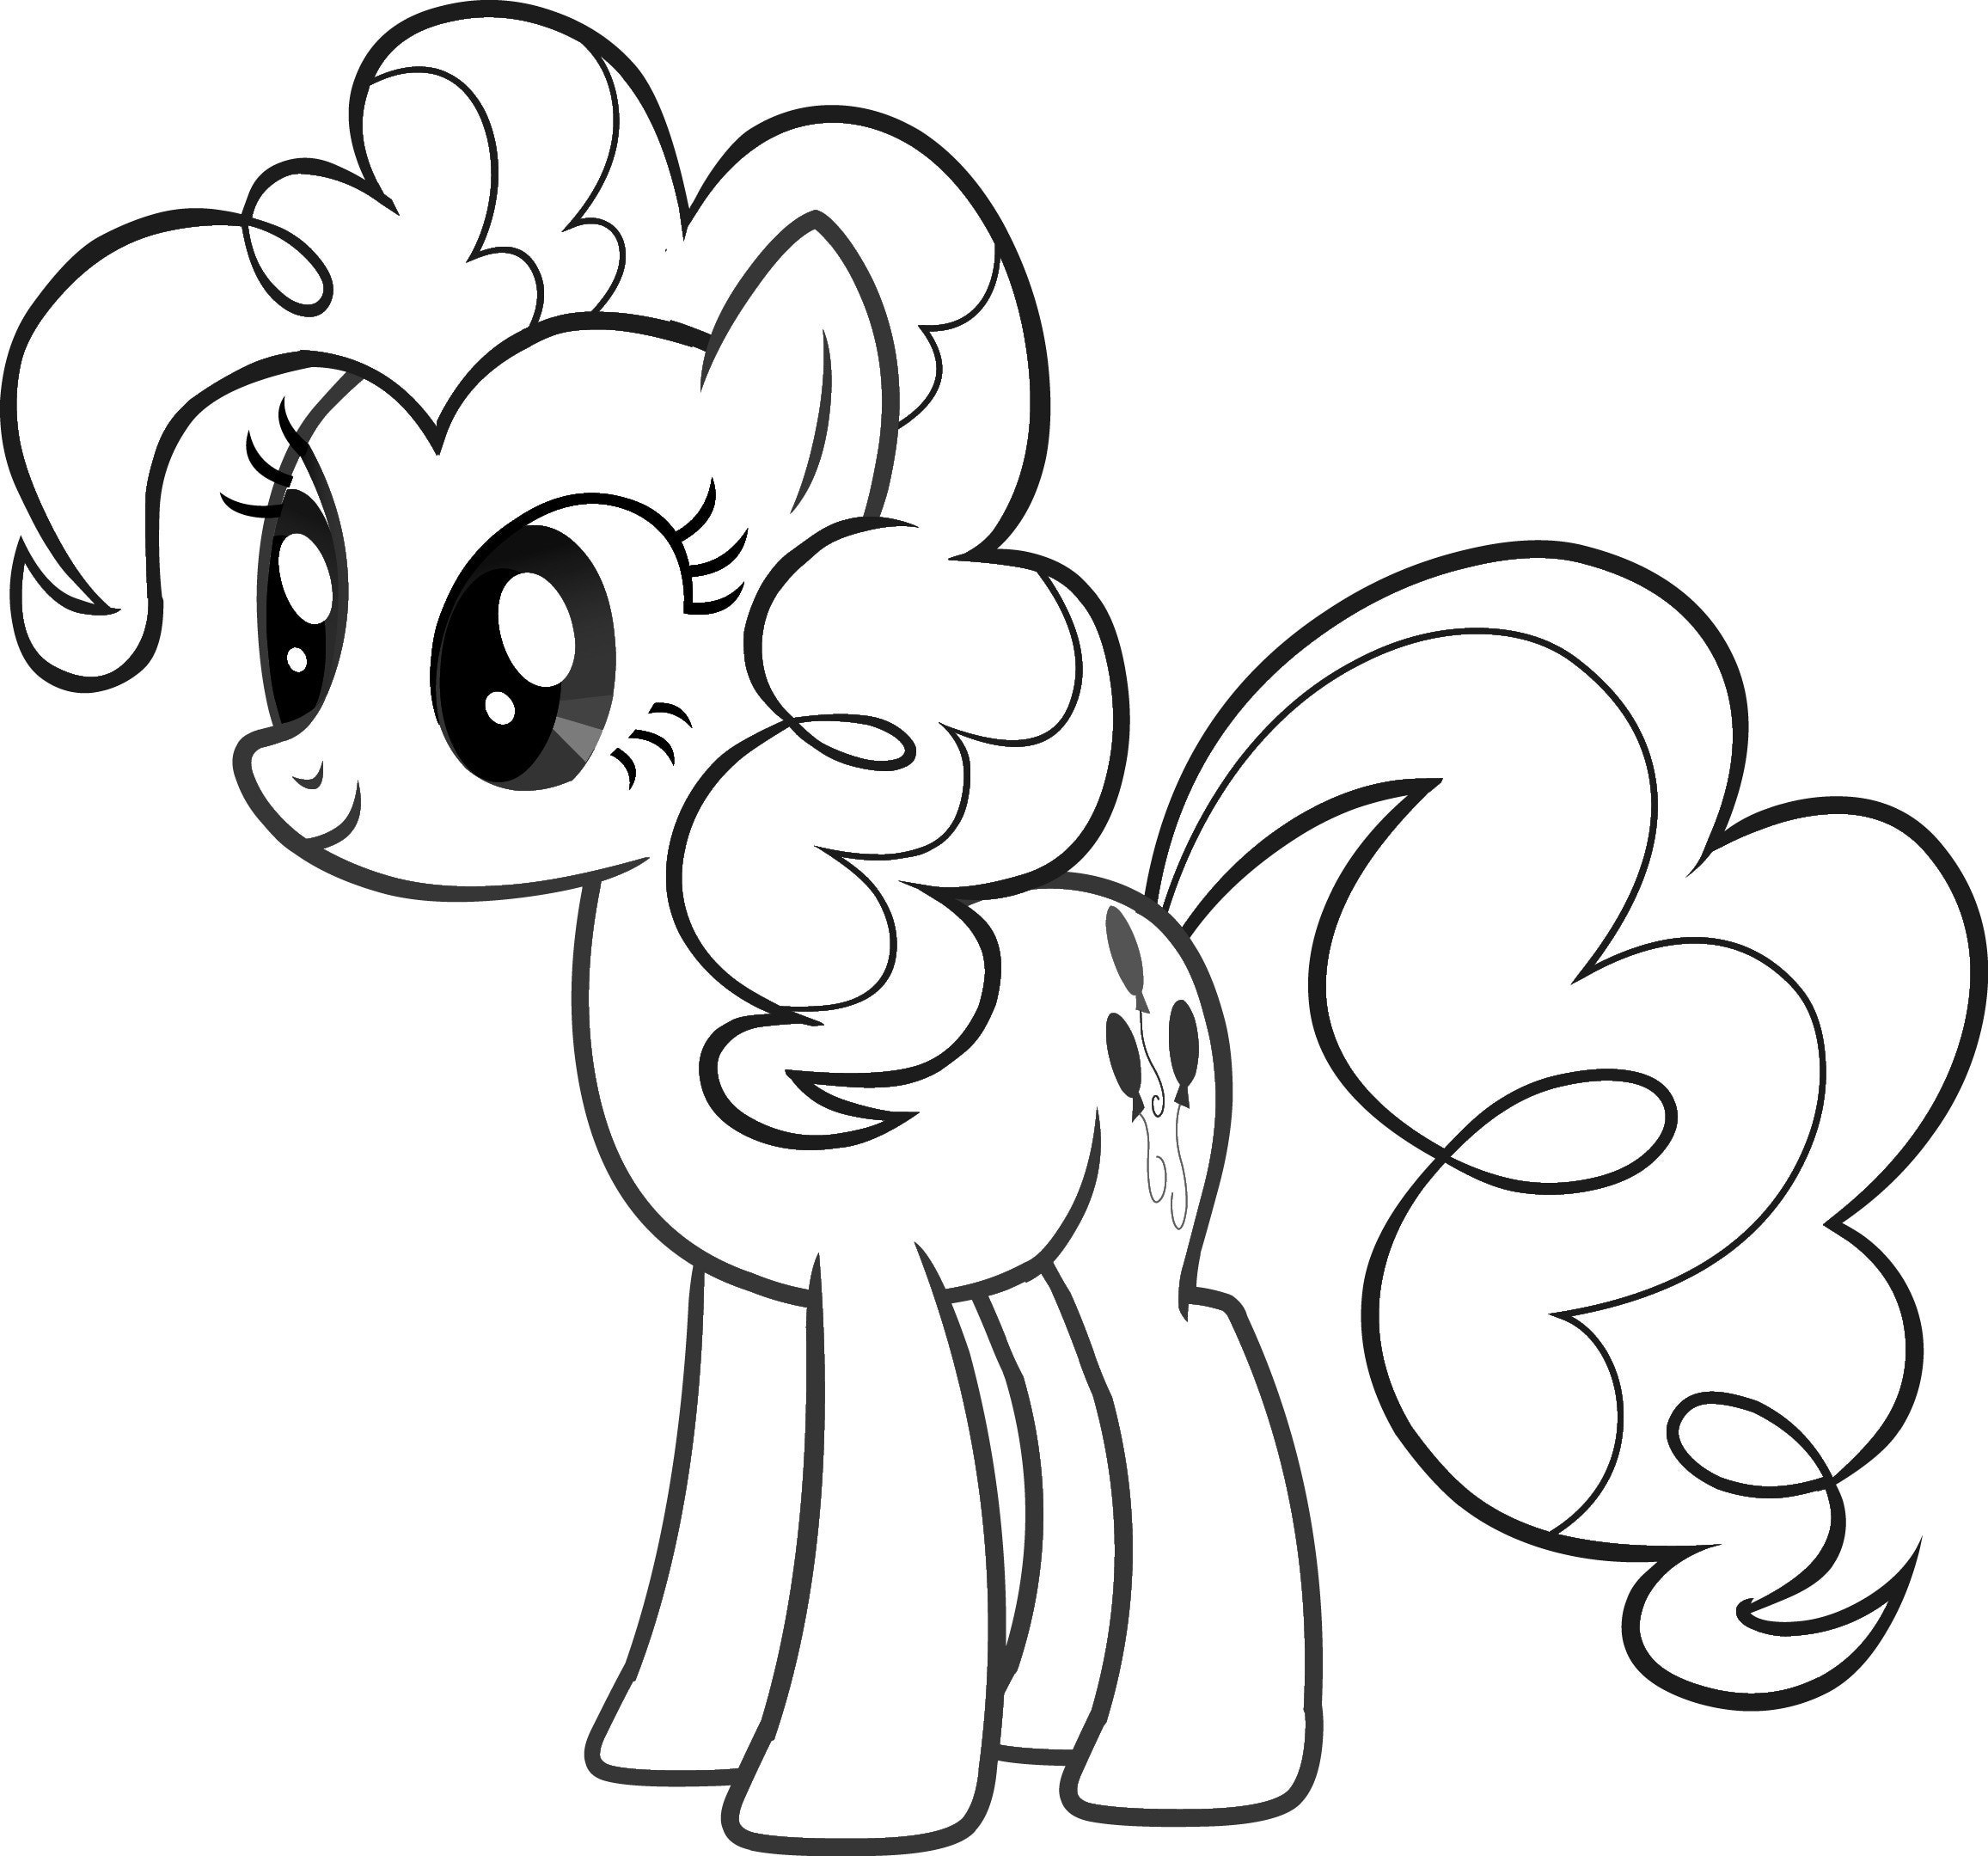 Girl Printable Coloring Pages
 My little pony coloring pages